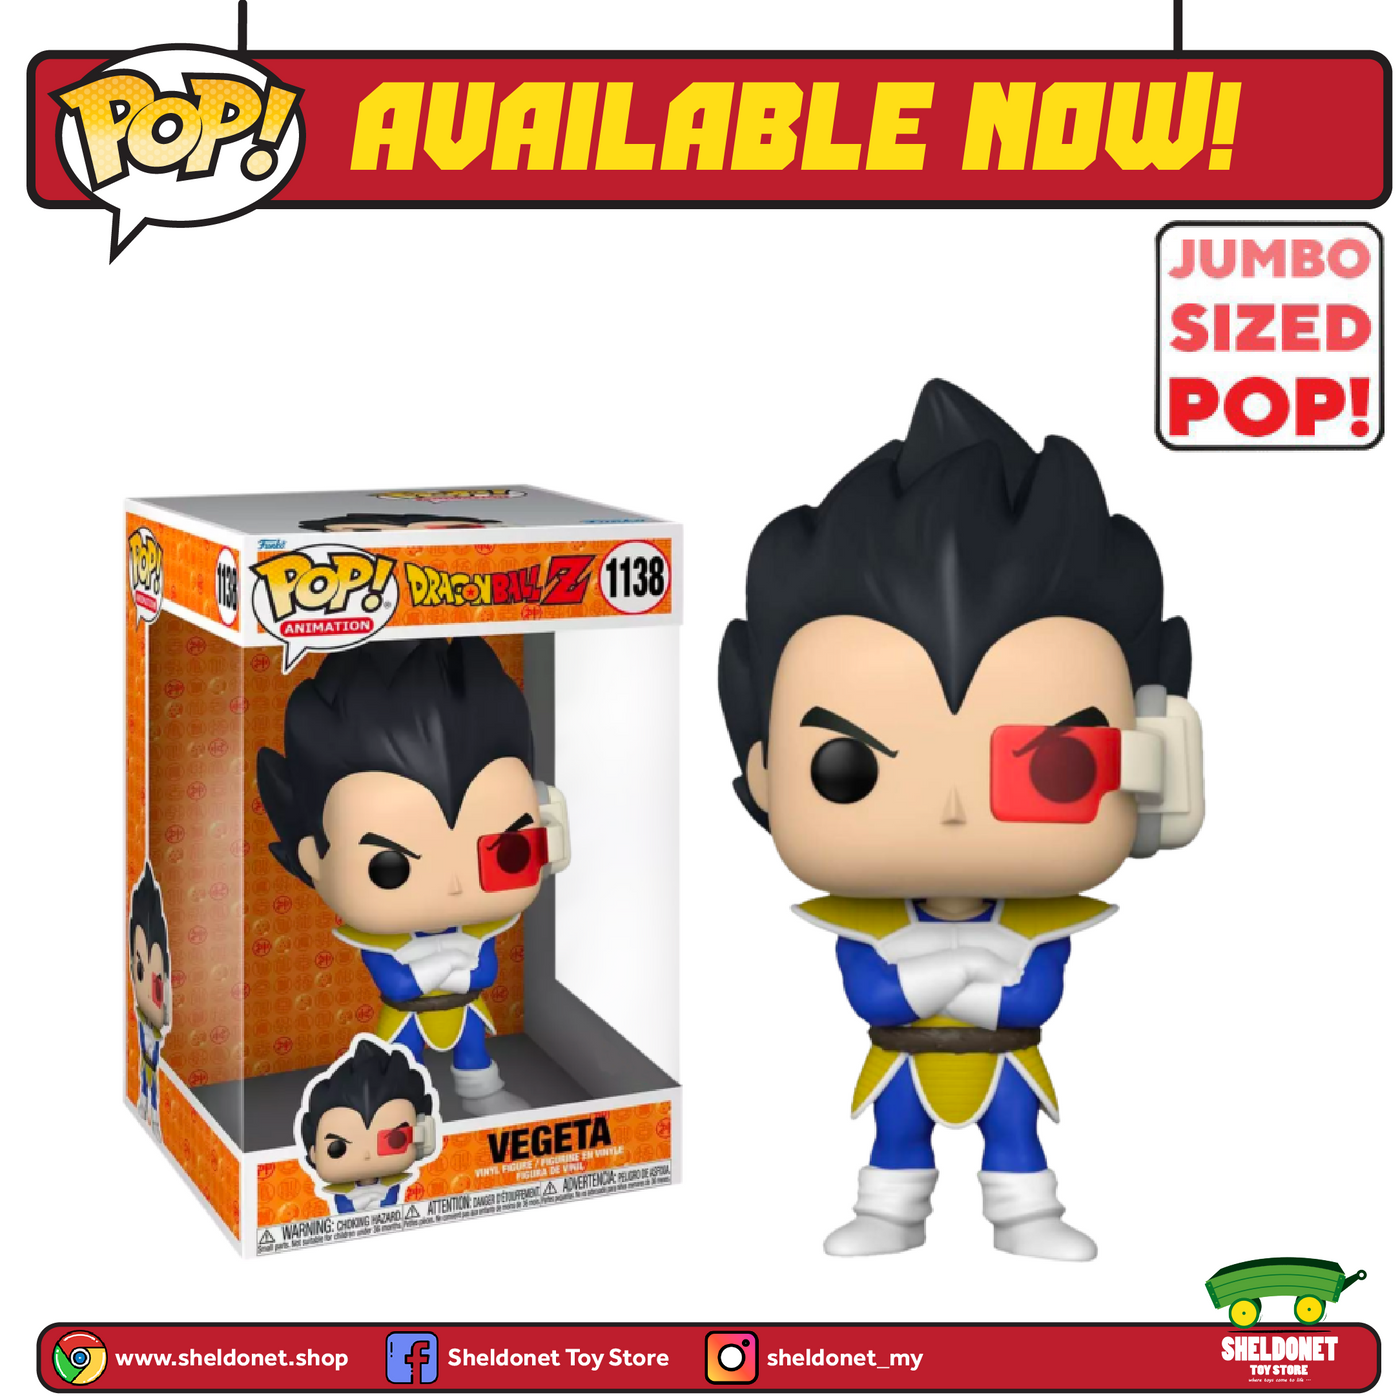 Dragon Ball Z Pops Launch at Funko Fair With Exclusives